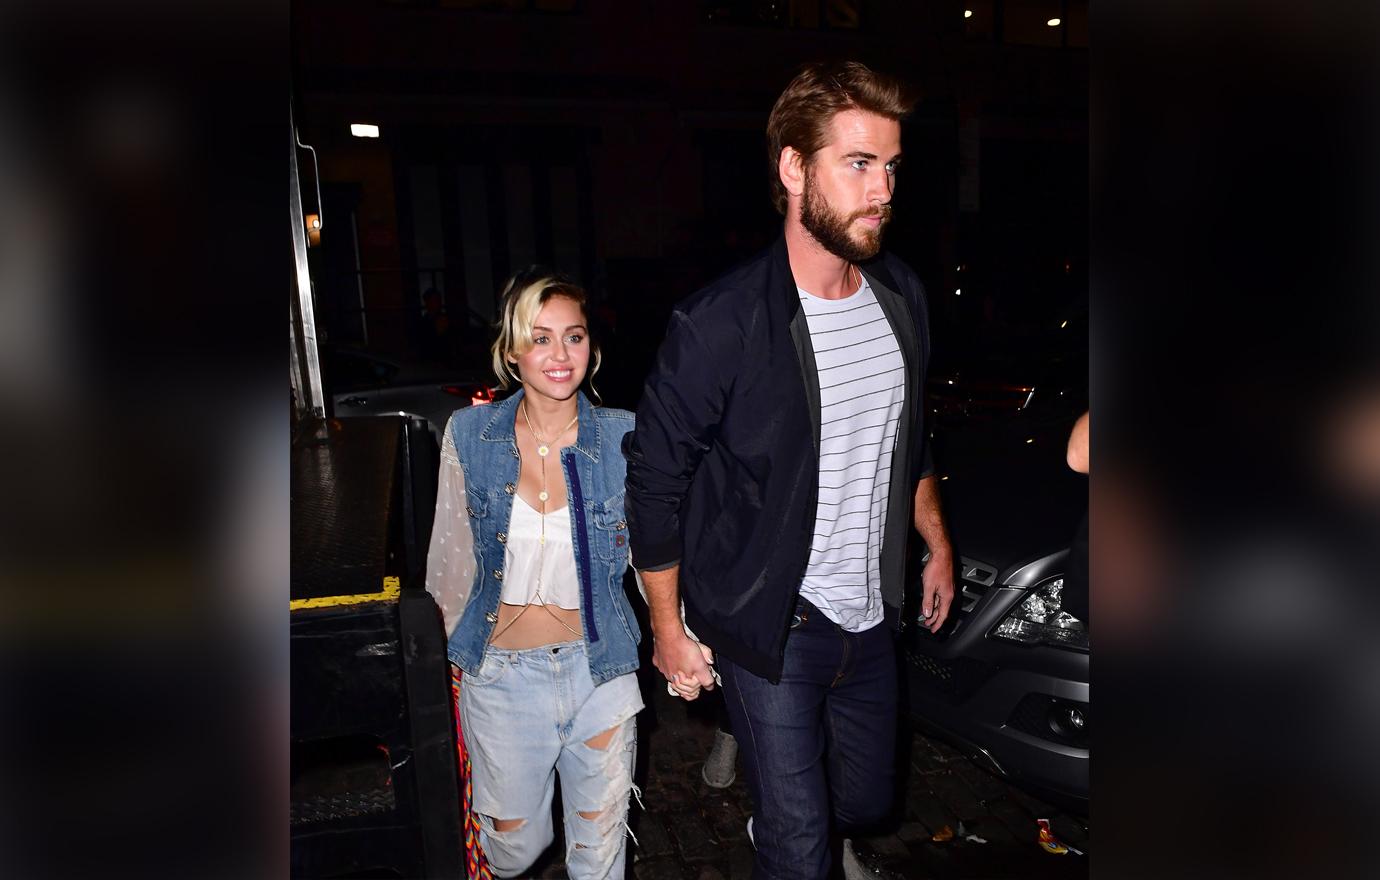 Miley Cyrus And Liam Hemsworth's Volatile Relationship Before Wedding